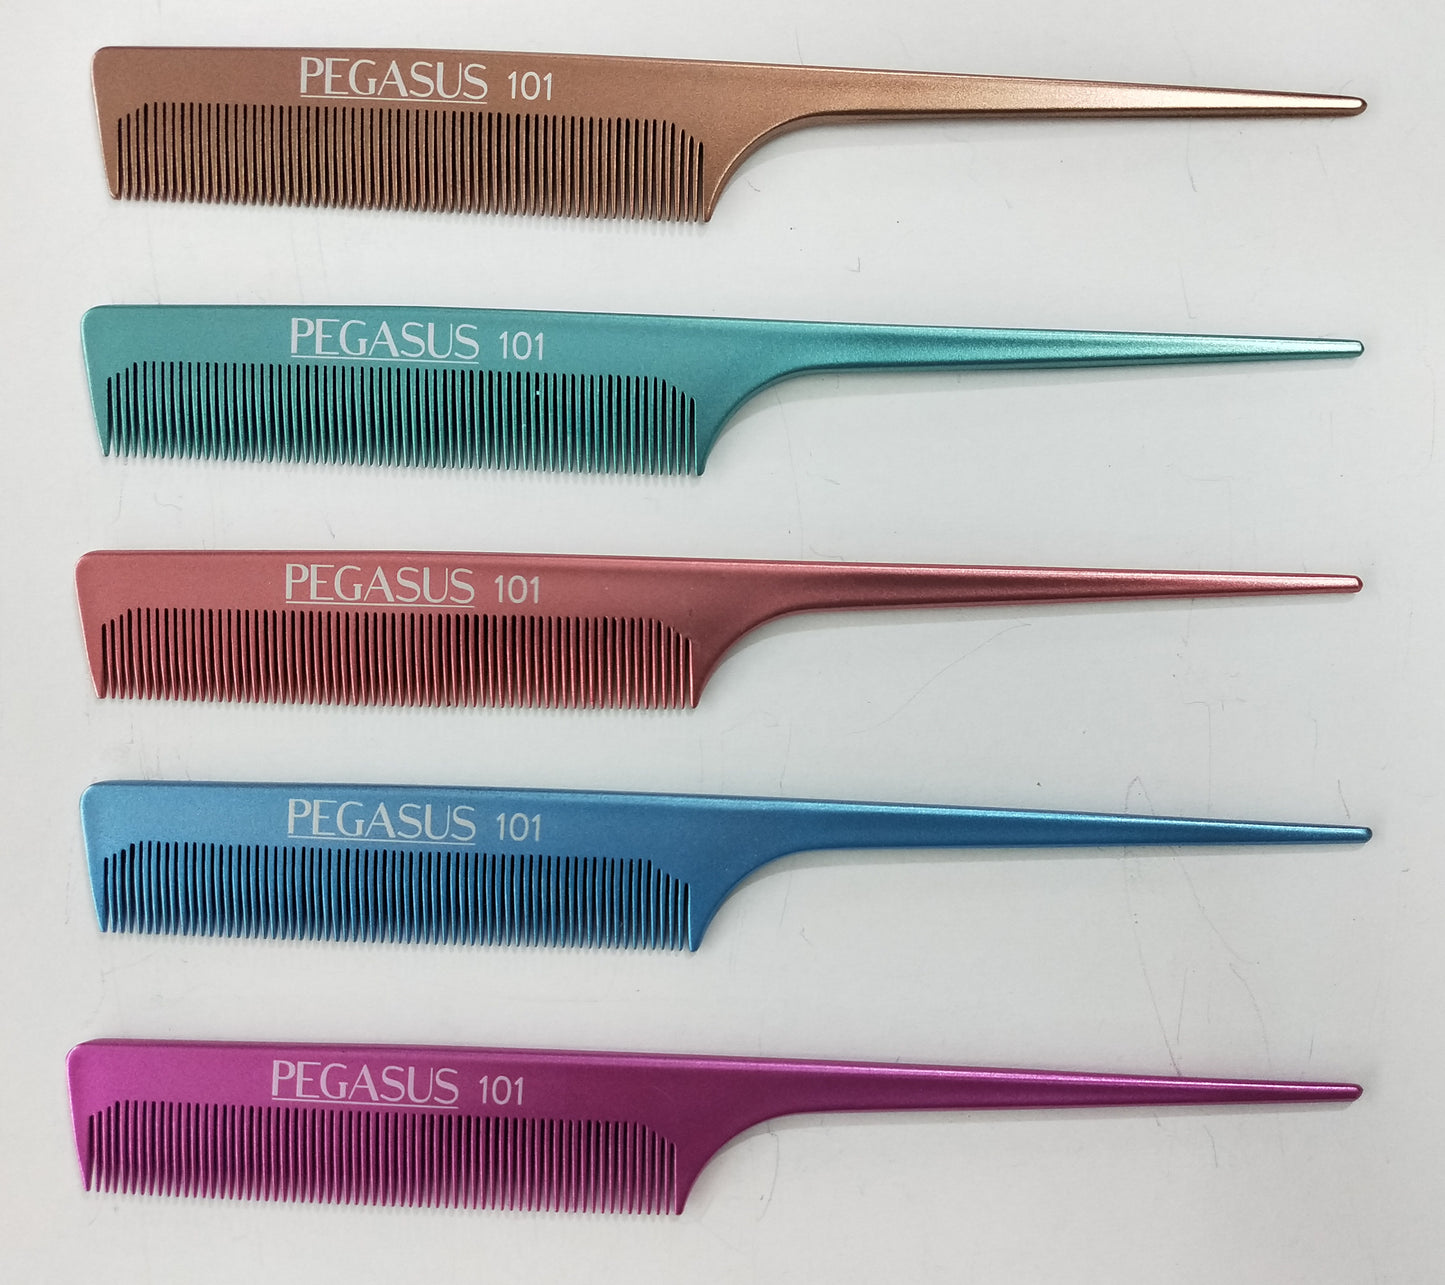 Pegasus MICOLOR 101, 8in Hard Rubber Fine Tooth Rat Tail Comb, Handmade, Seamless, Smooth Edges, Anti Static, Heat and Chemically Resistant, Great for Parting, Coloring Hair | Peines de goma dura - Pink